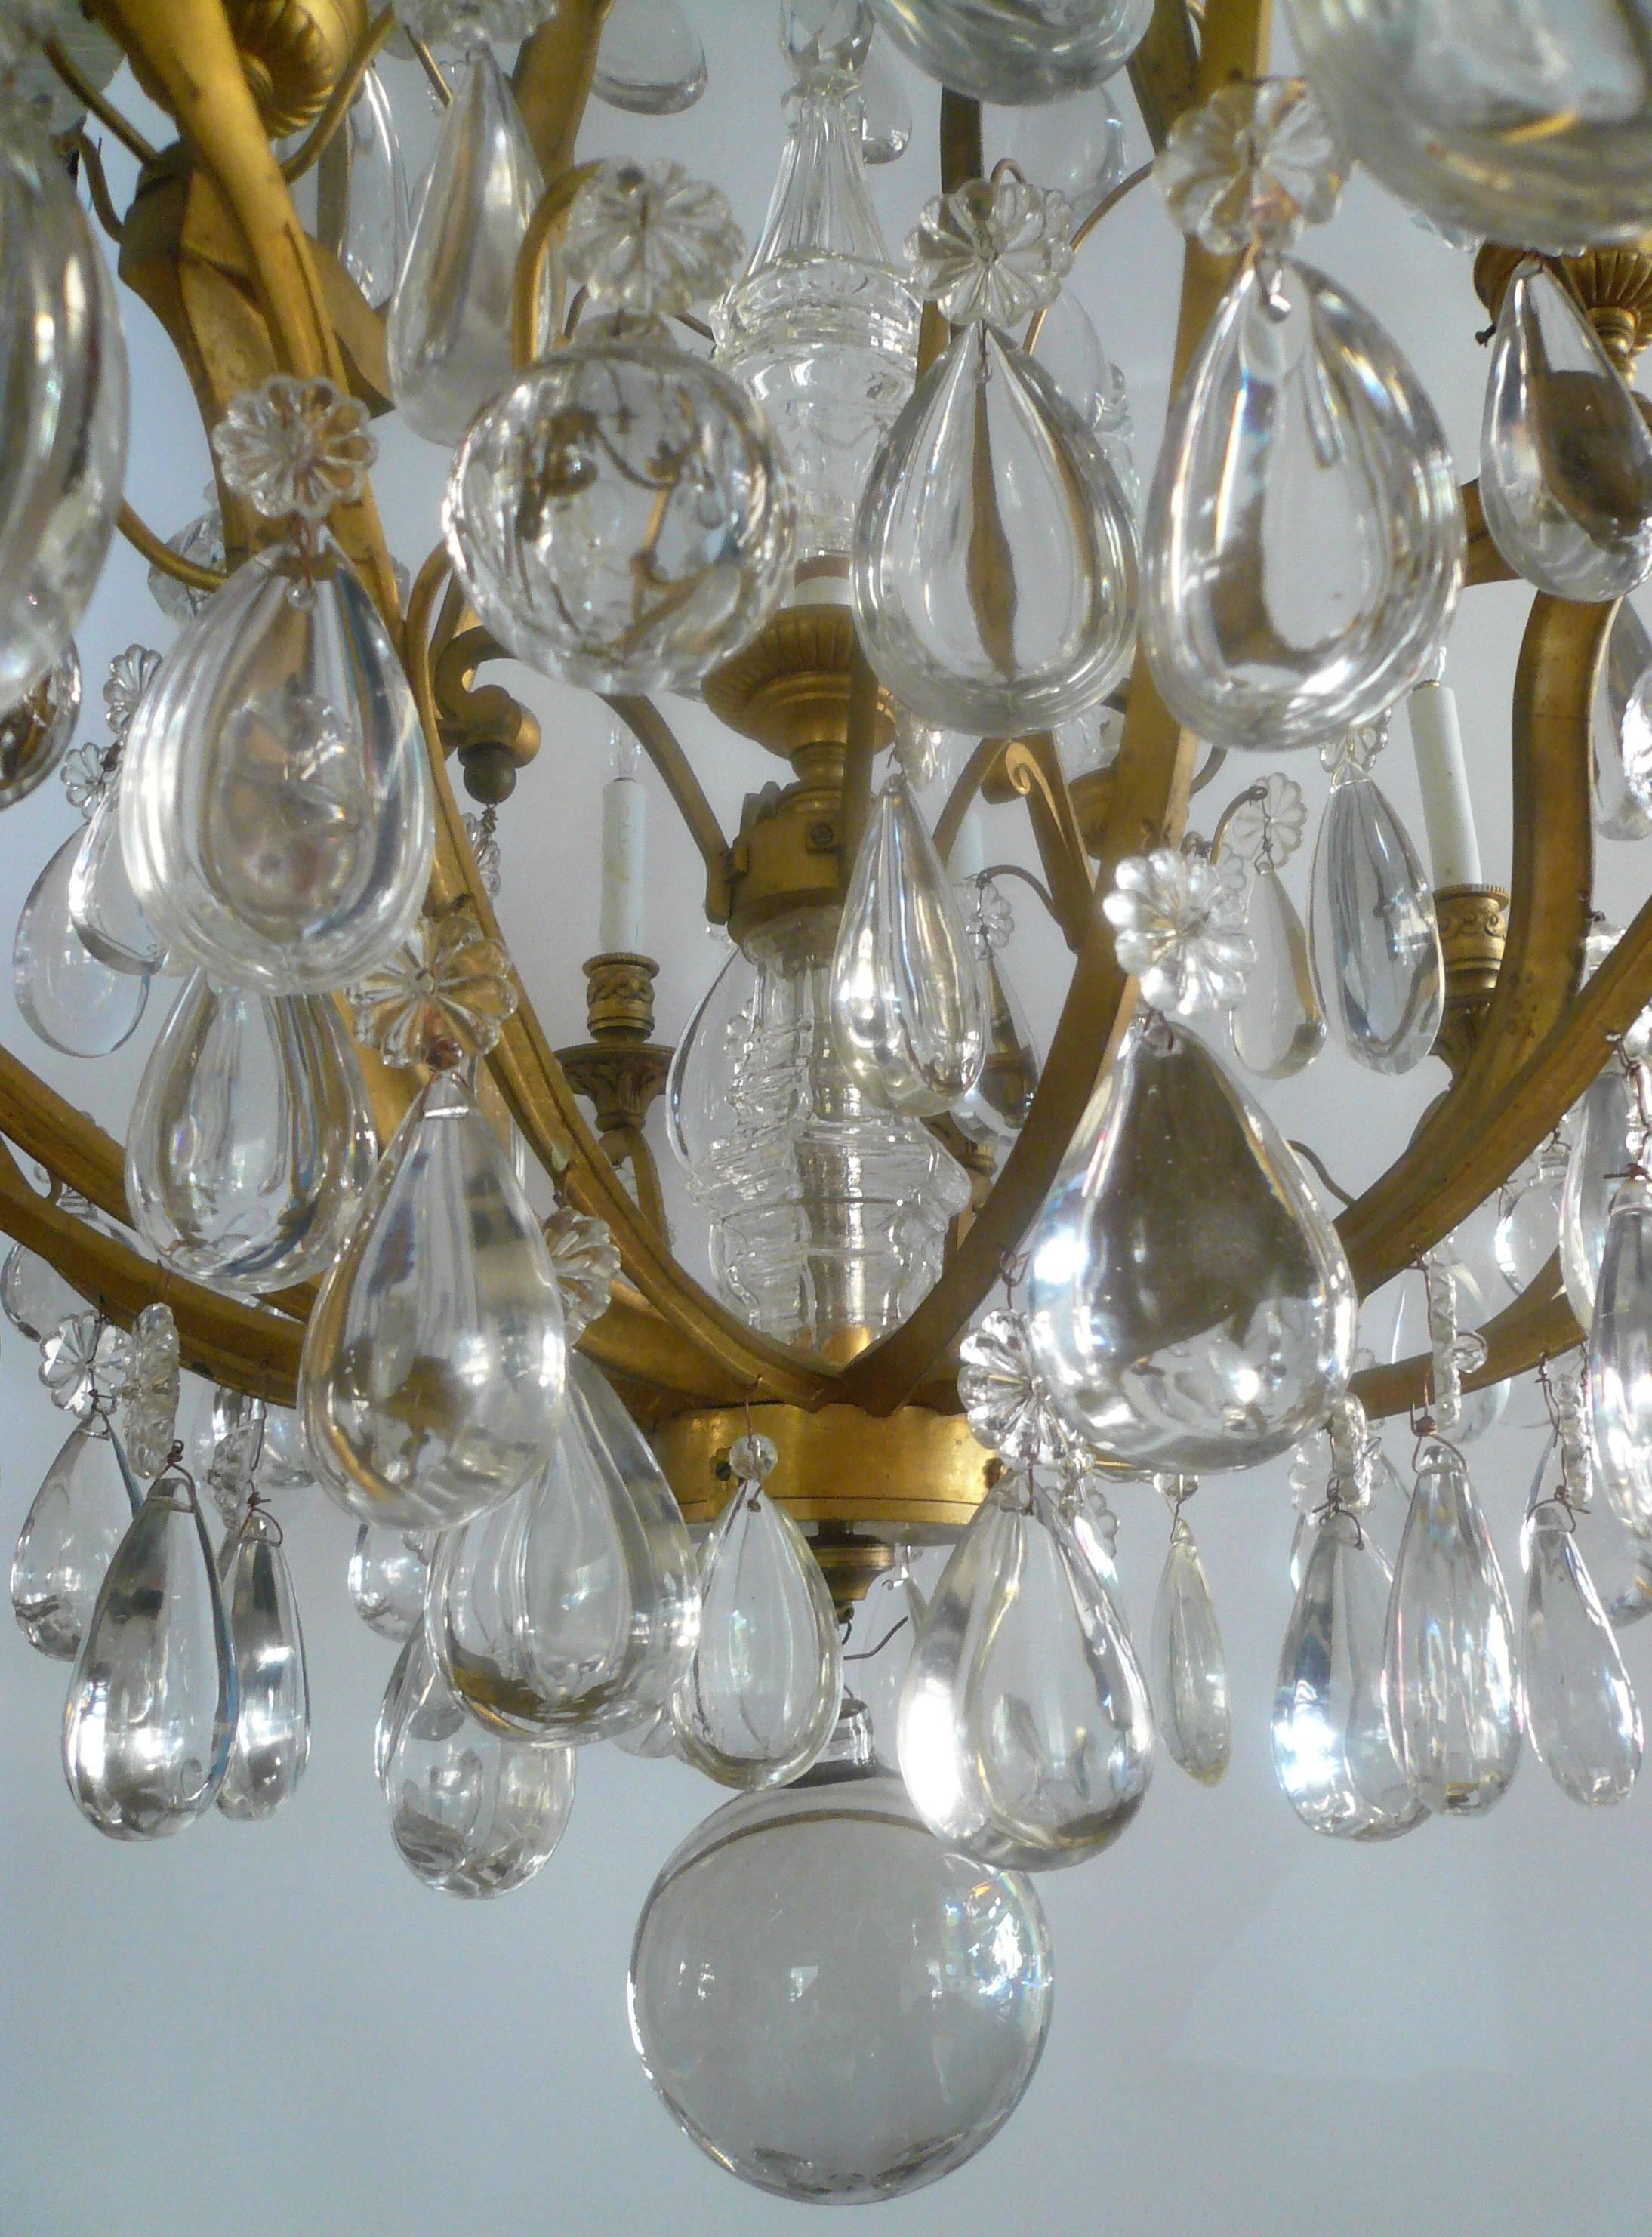 This extra fine quality chandelier attributed to Baccarat, has a matching pair of sconces, also available in my listings. With 12 arms and seventeen lights (the five larger hollow spikes contain light sockets), this is a superior fixture.